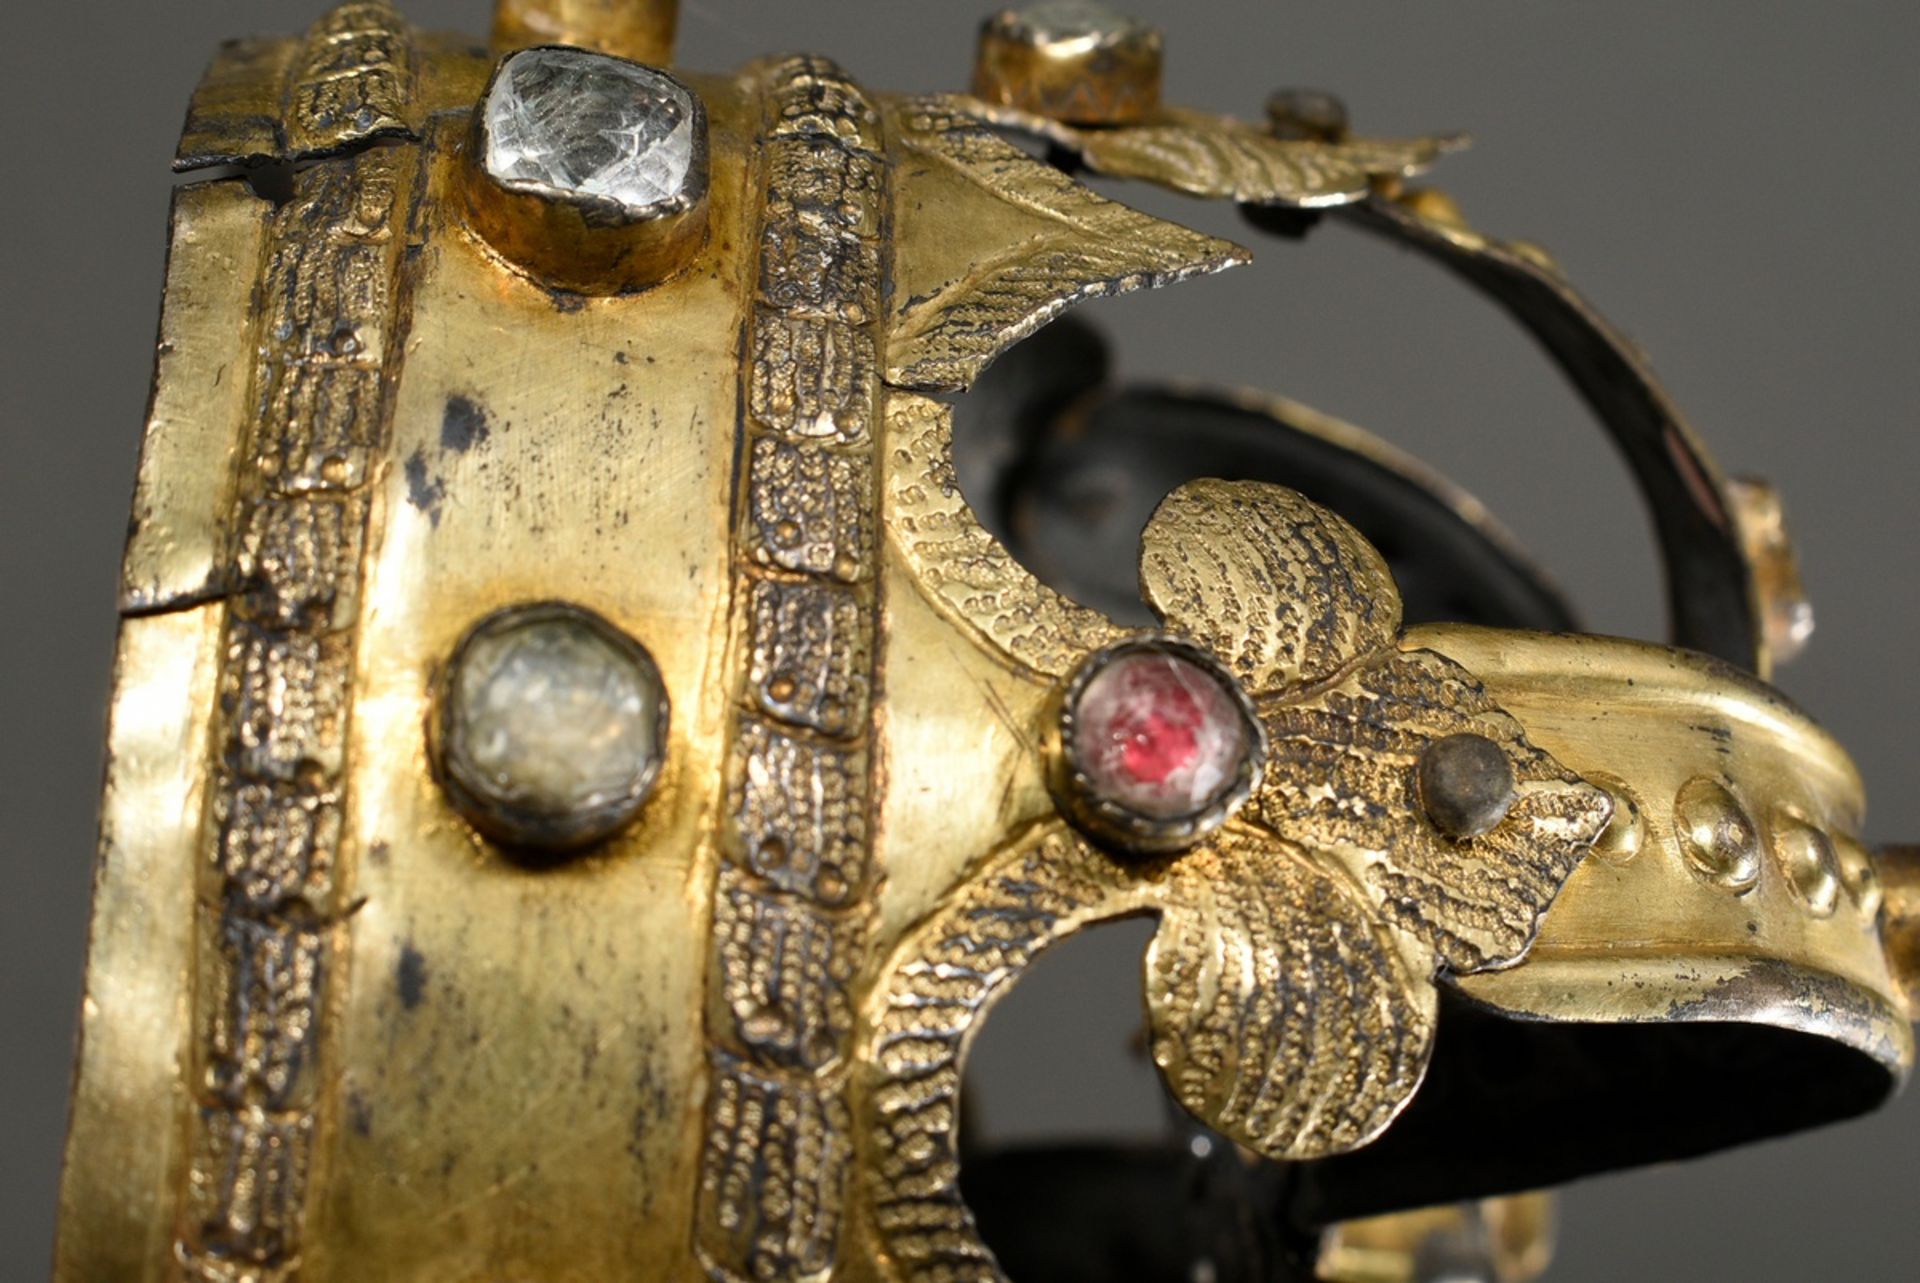 Antique crown of the Virgin Mary with glass stones, probably South German, 19th century, gilt metal - Image 6 of 9